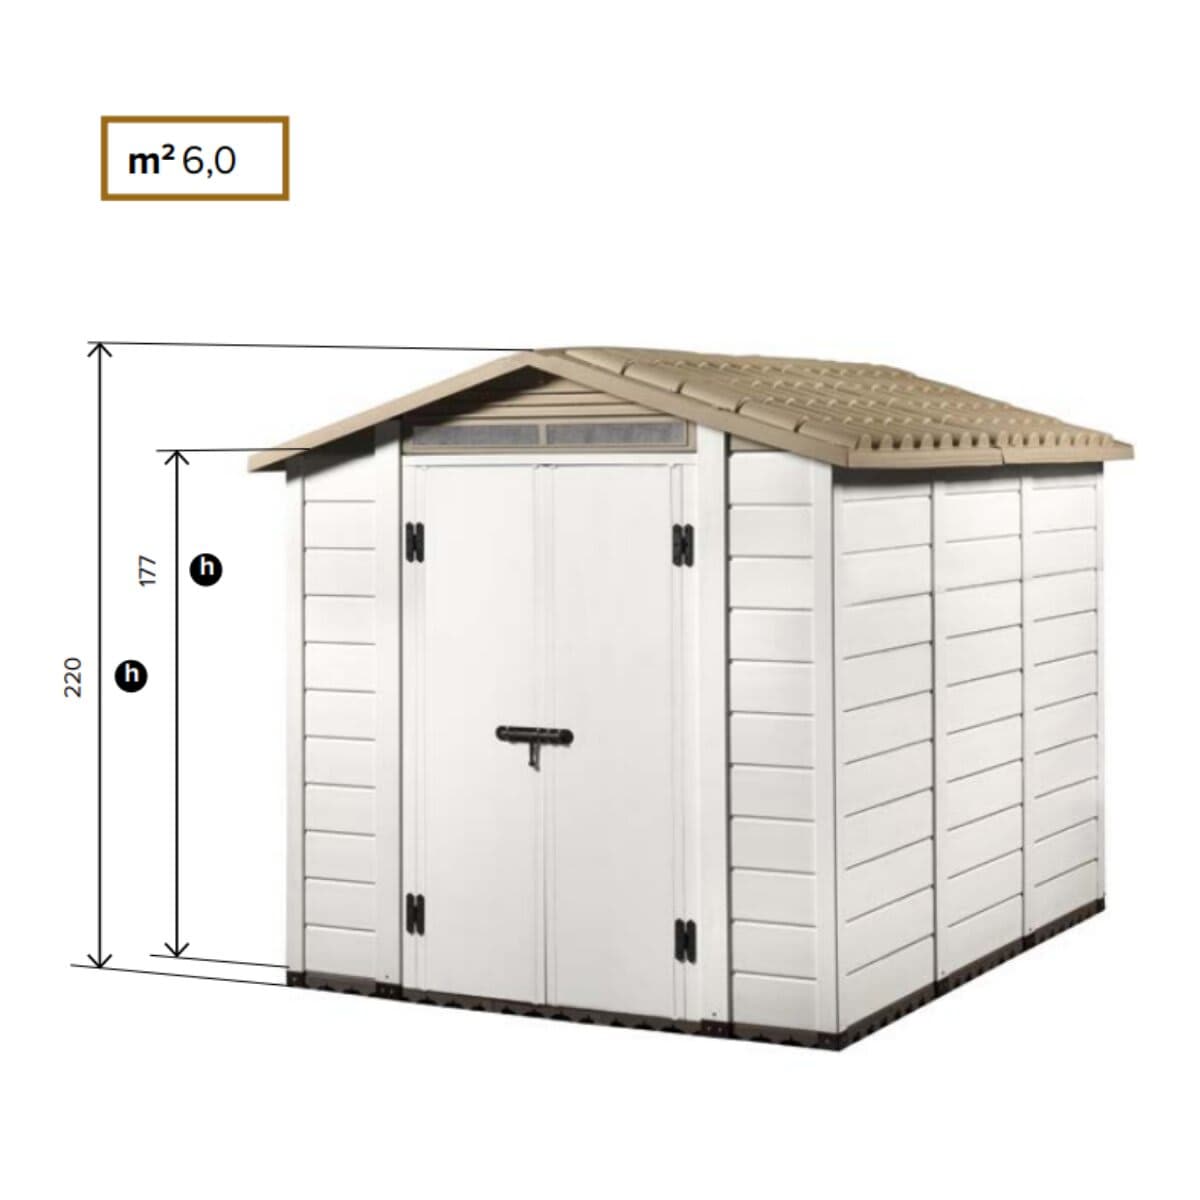 GARDEN SHED TUSCANY EVO 240 THICKNESS 20MM EXTERNAL DIMENSIONS 242.5X202.5 FLOOR INCLUDED - best price from Maltashopper.com BR500013798